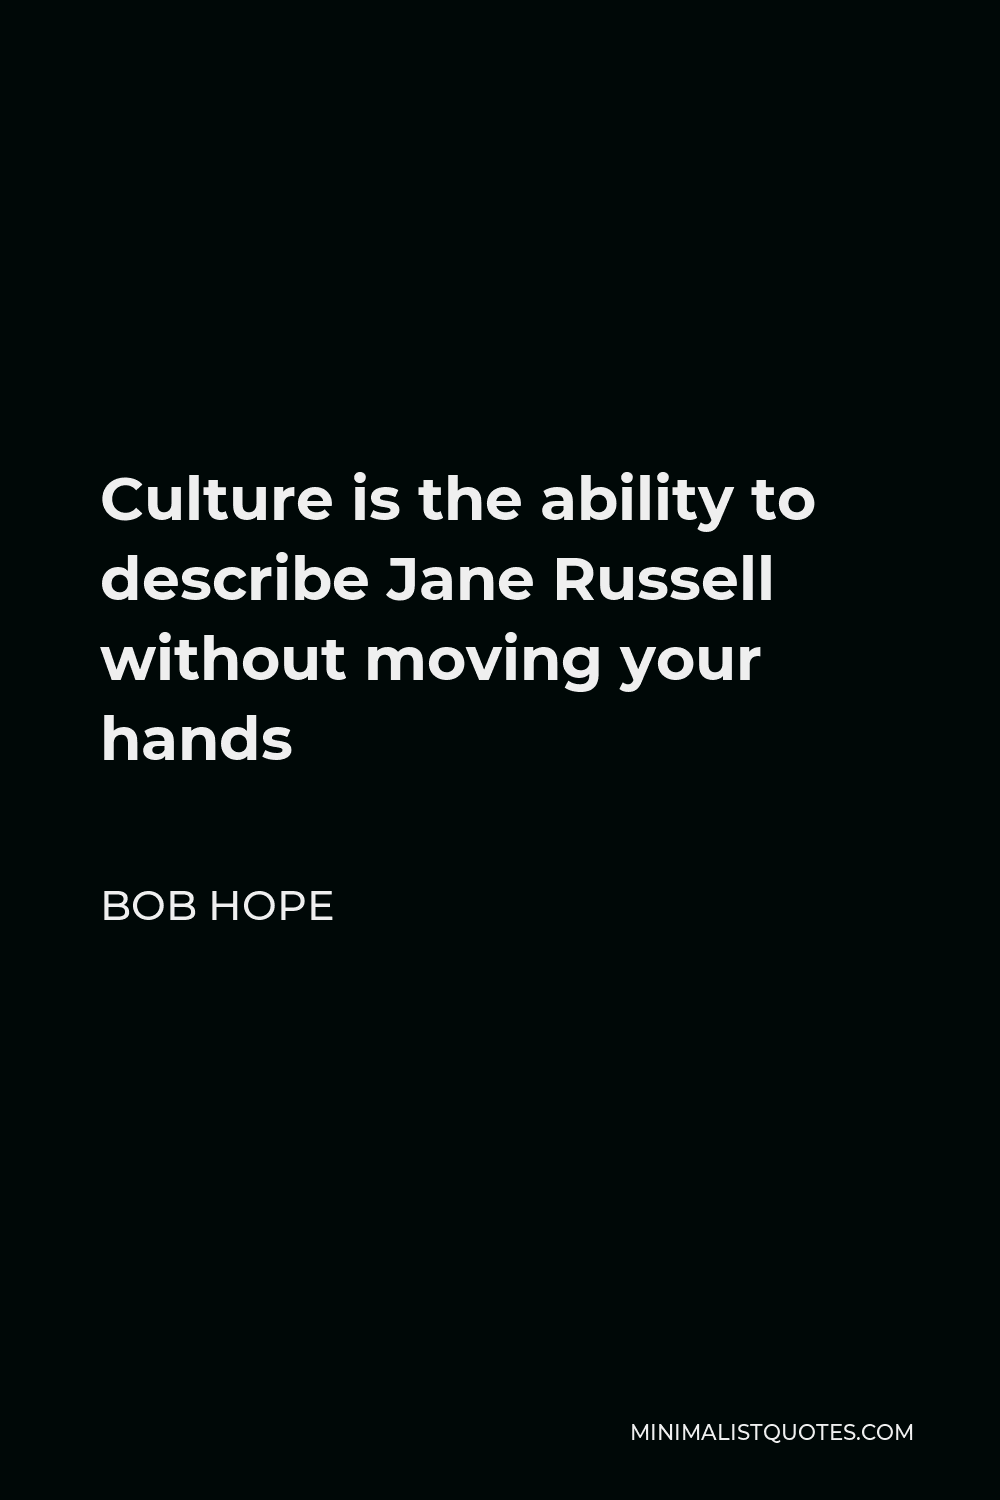 Bob Hope Quote - Culture is the ability to describe Jane Russell without moving your hands